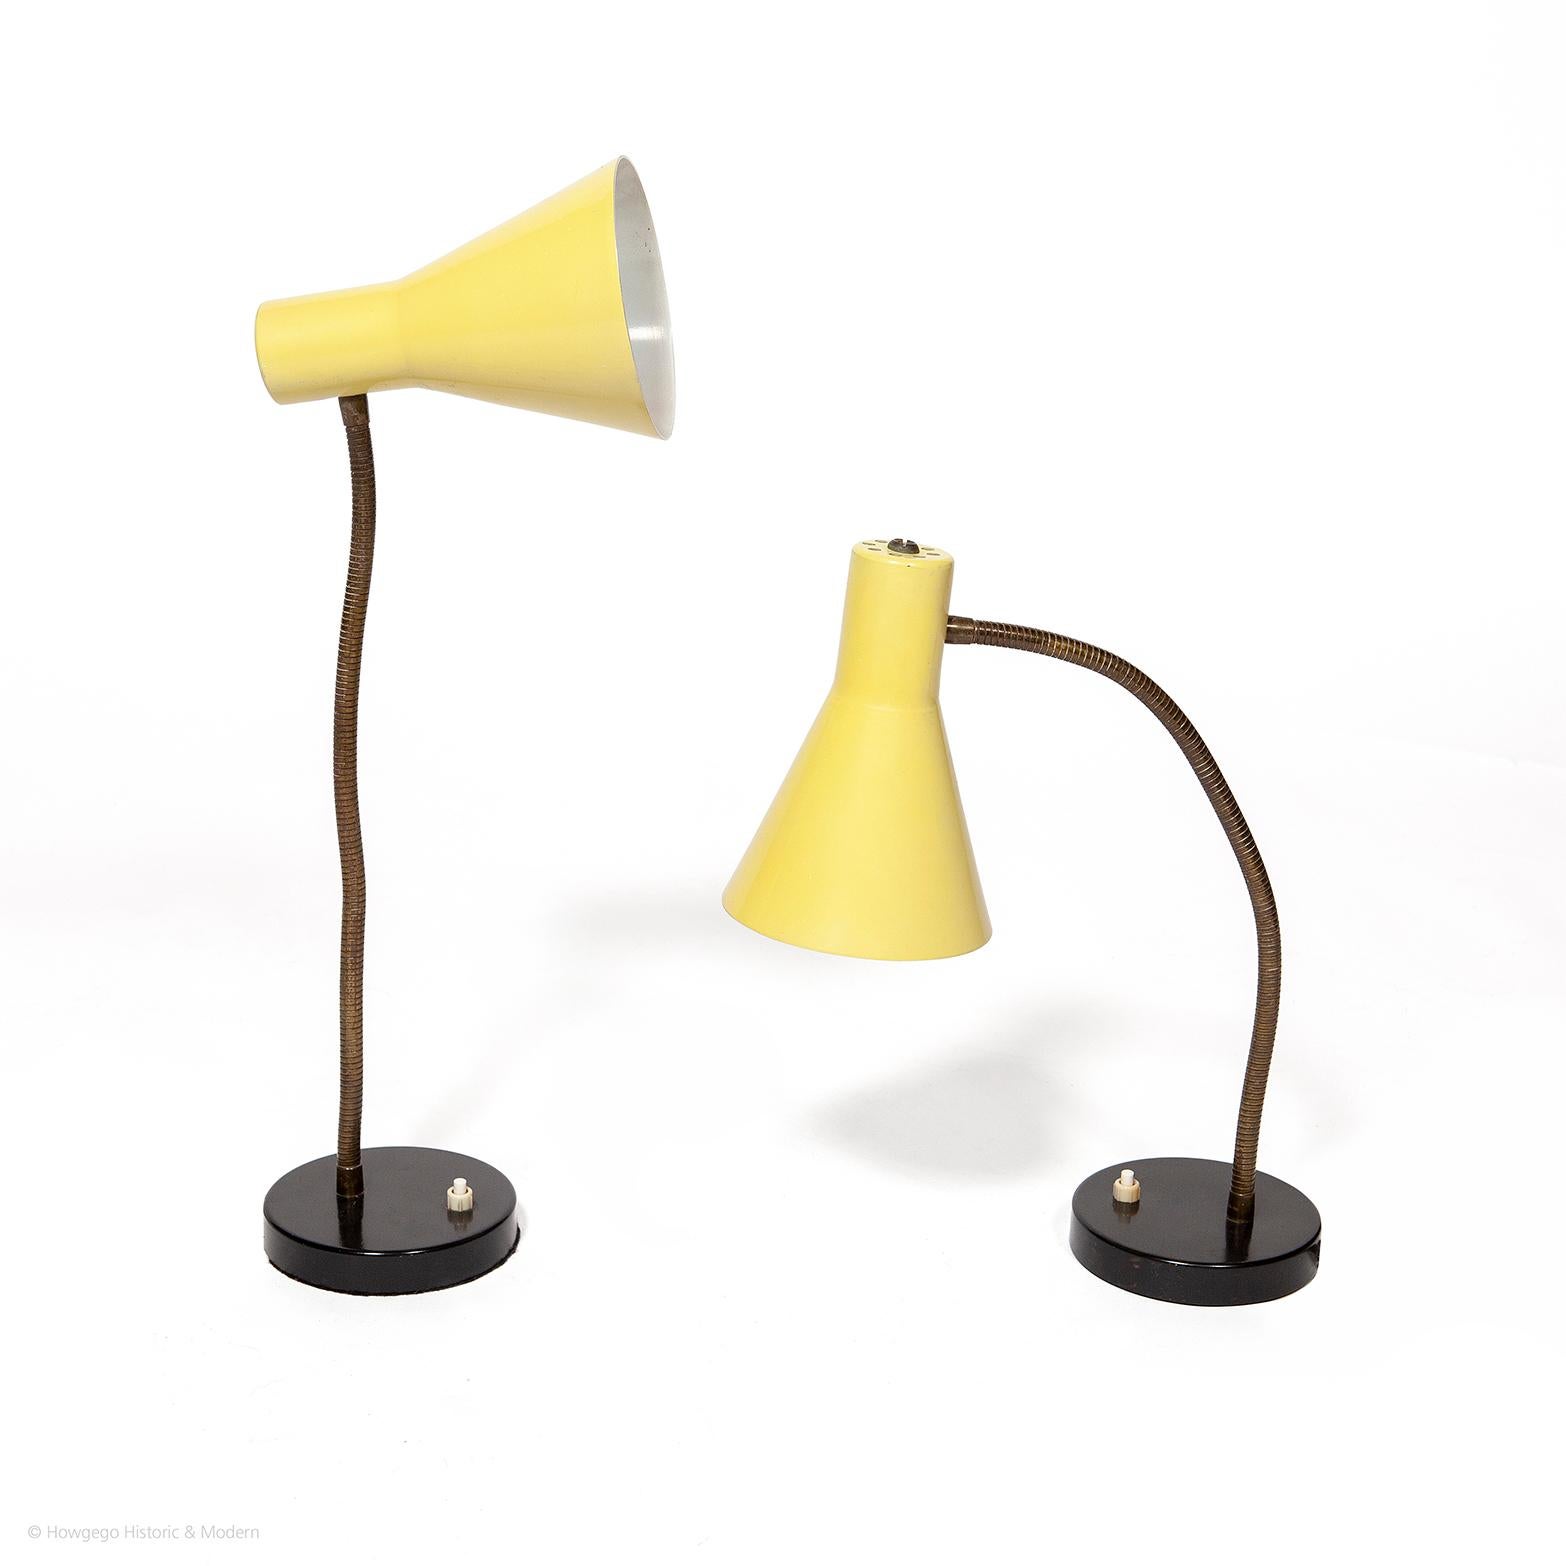 - Striking pair of Mid-Century Modern lamps
- In original condition
- Stylish design inspired by Stilnovo designs of the period
- Statement pieces injecting colour and fun into any interior

Original tapering yellow enamelled metal shades